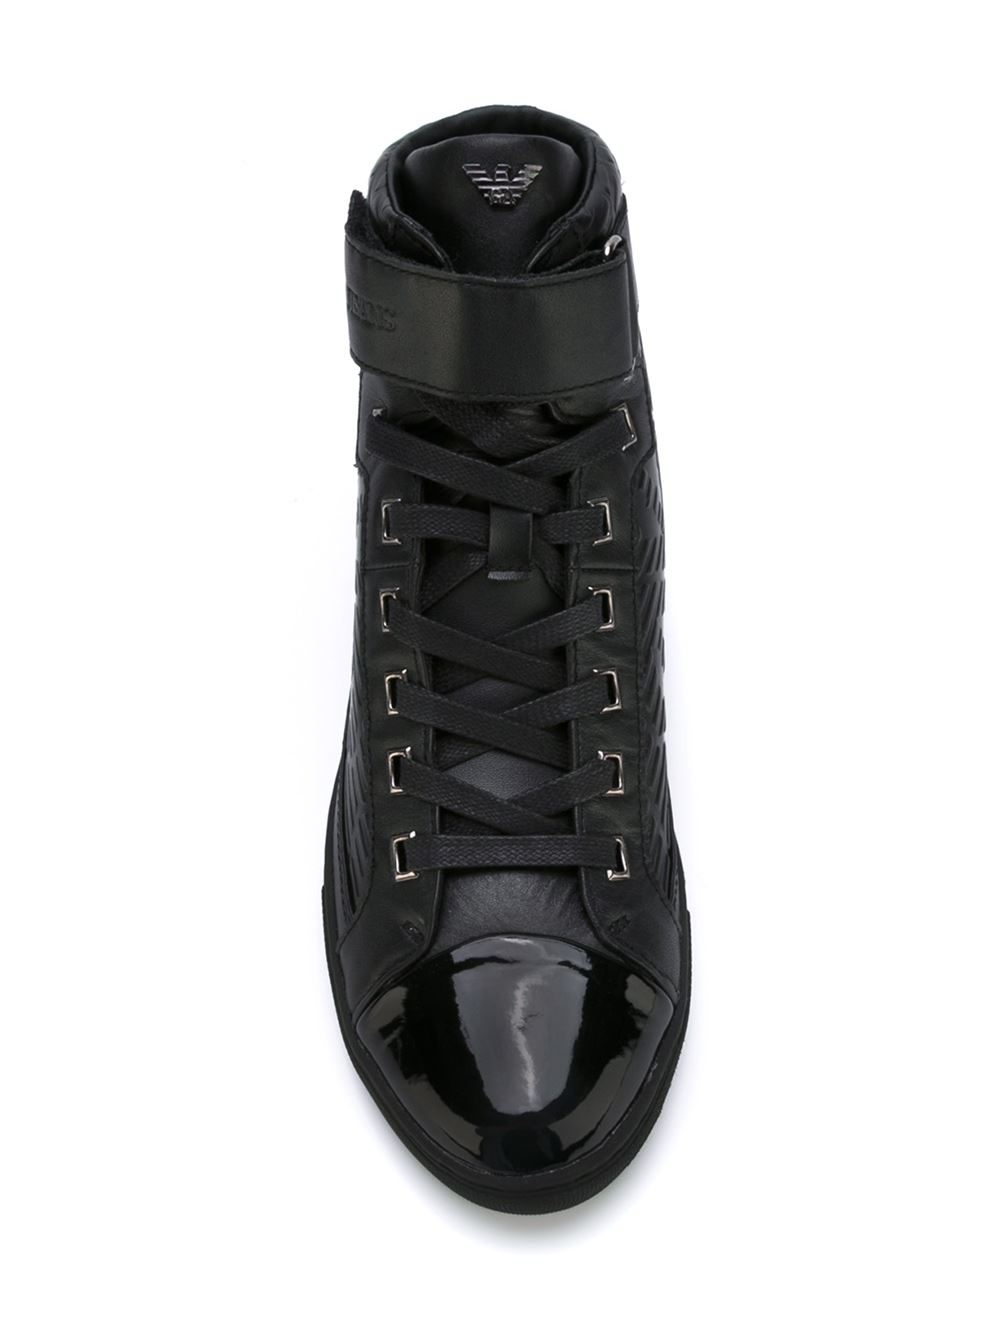 Armani Jeans Mens Sneakers Black Leather Lace Up High Neck - Top Brand  Outlet UK